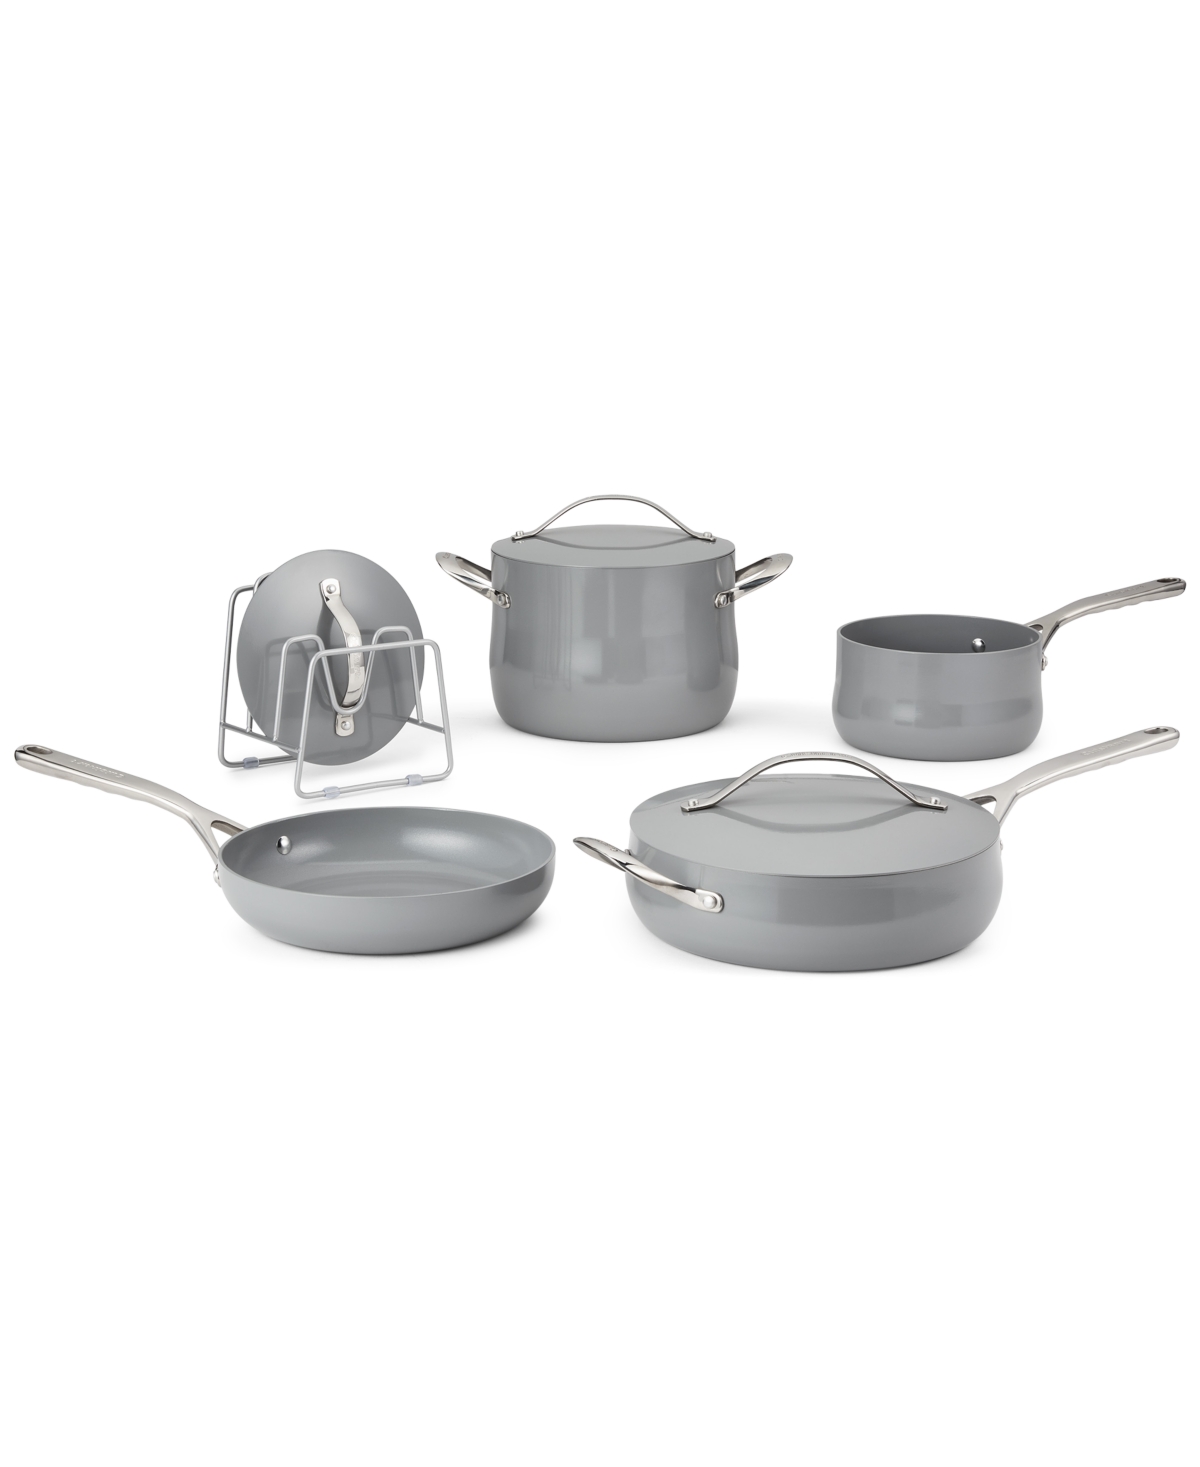 Cuisinart Culinary Collection 8-pc. Nonstick Ceramic Cookware Set In Gray